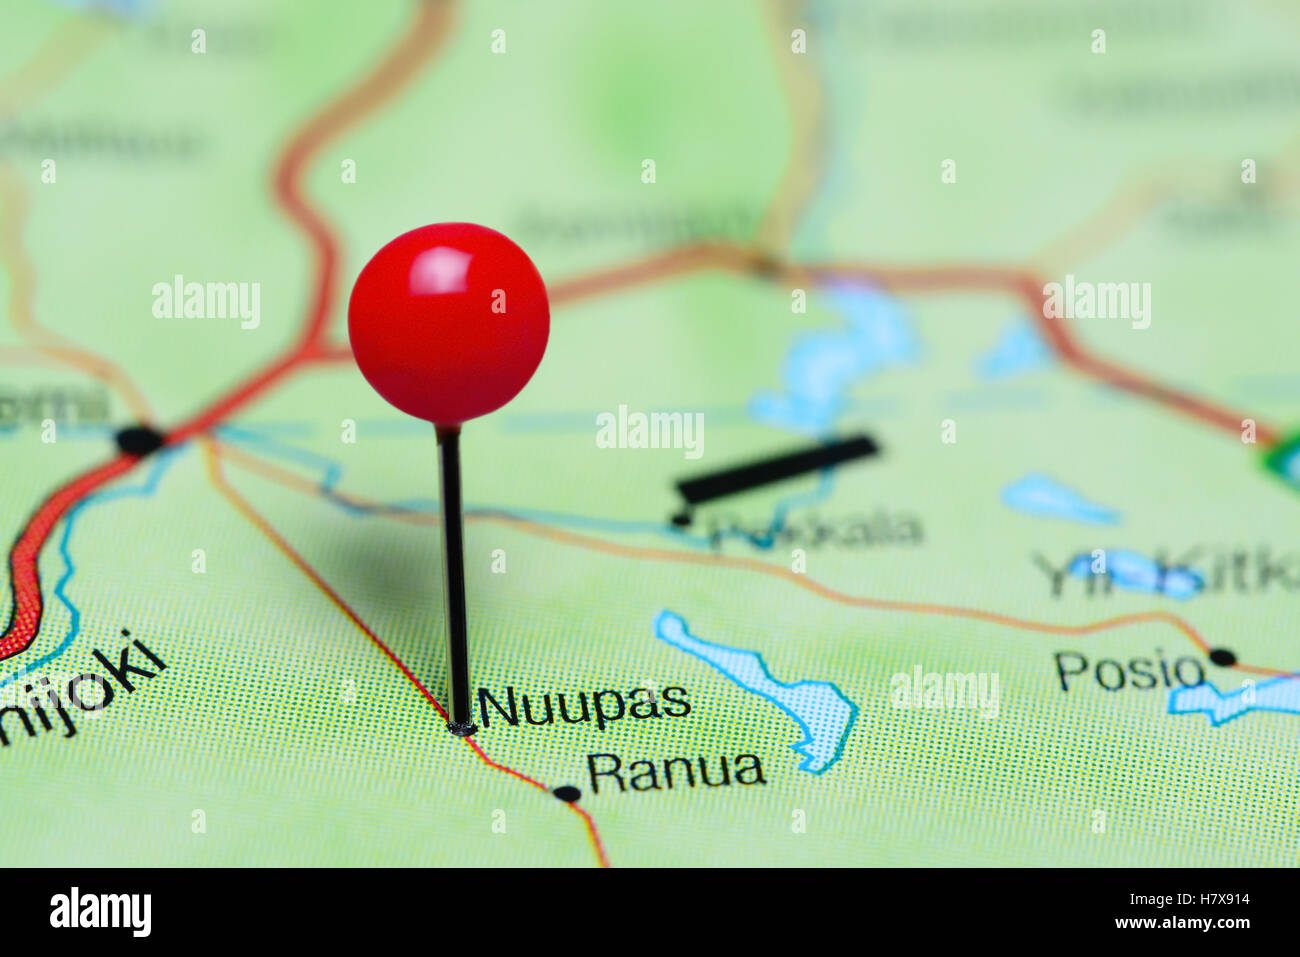 Nuupas pinned on a map of Finland Stock Photo